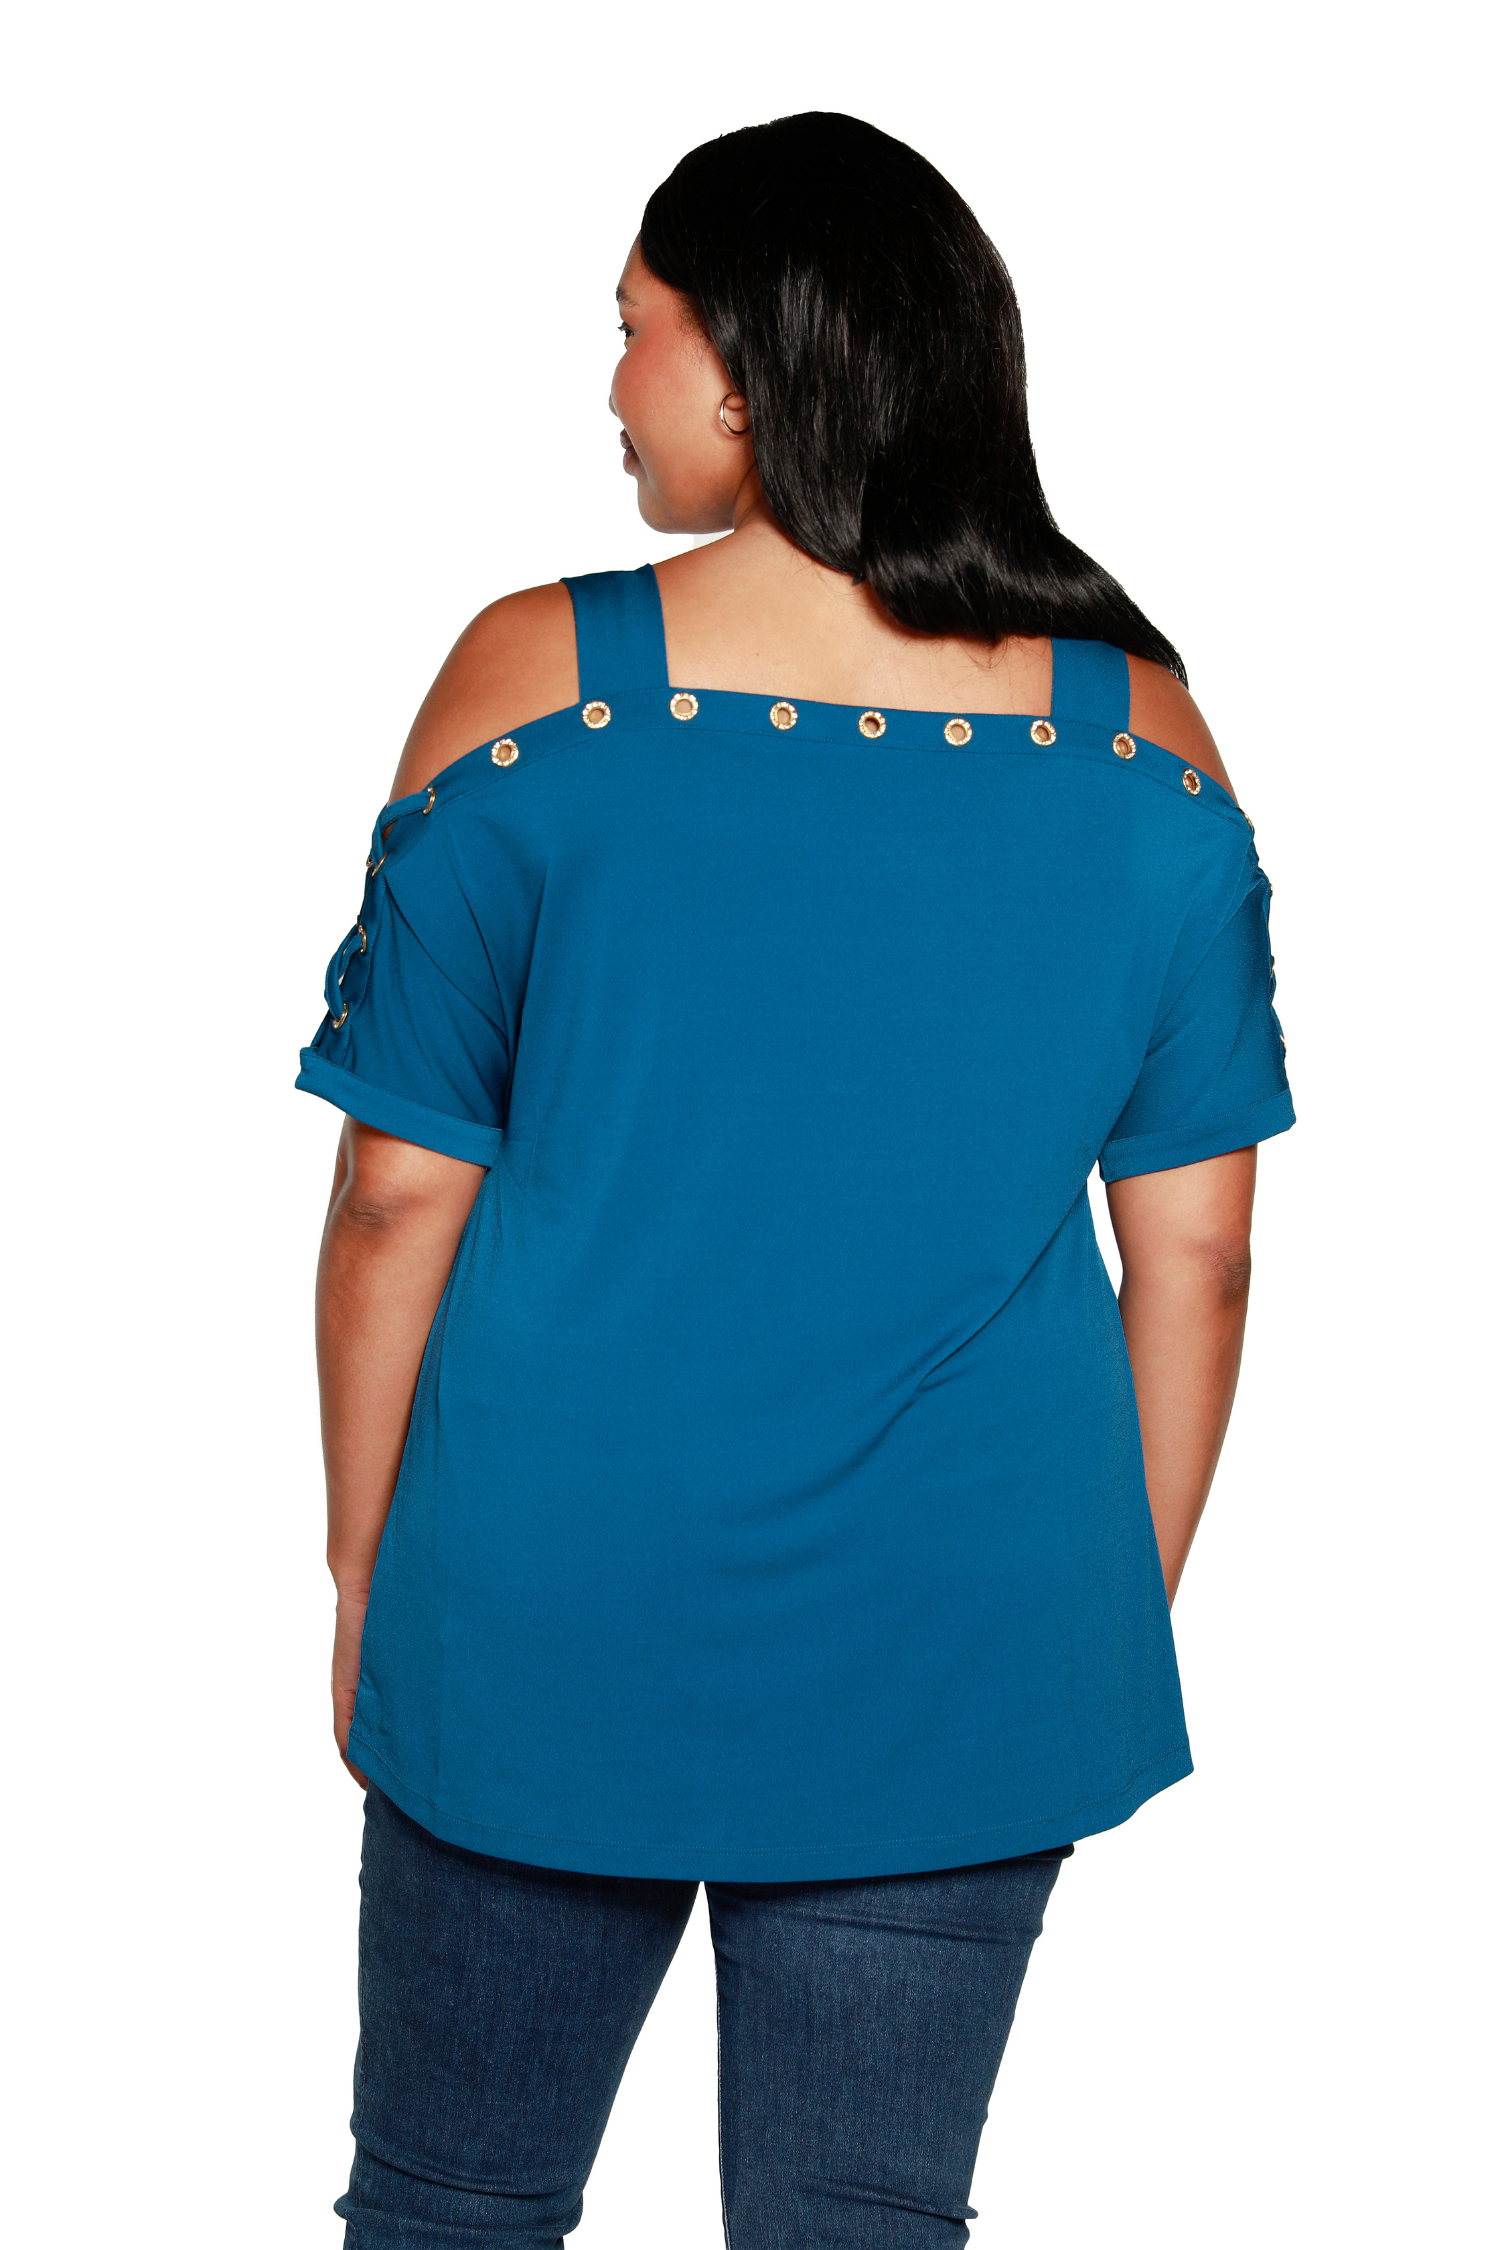 Women's Short Sleeve Cold Shoulder Top with Gold Rhinestone Lace Up Detail | Curvy